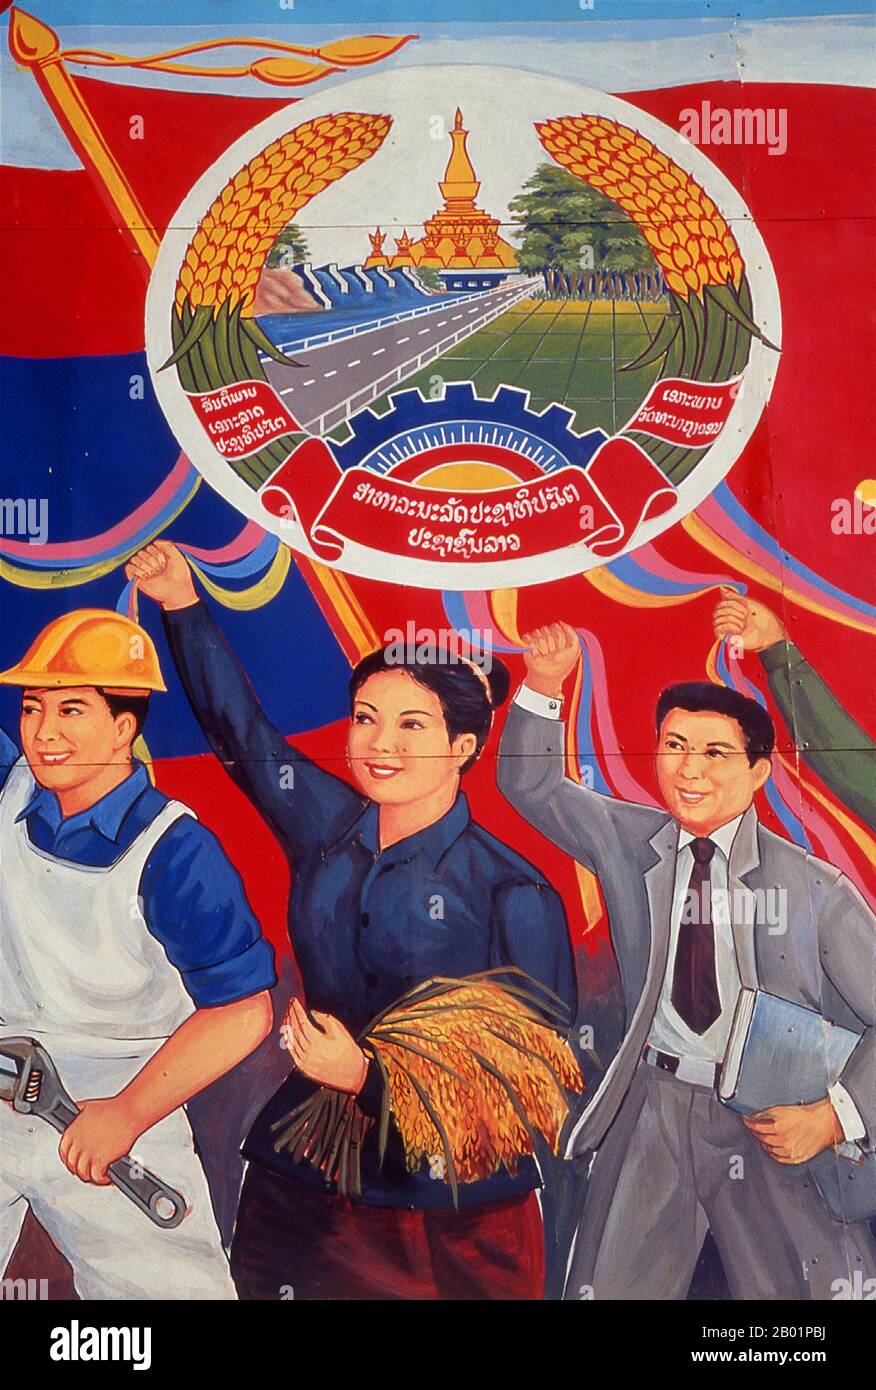 Laos: Revolutionary Socialist realist-style political poster on the streets of Vientiane.  Socialist realism is a style of realistic art which was developed in the Soviet Union and became a dominant style in other communist countries. Socialist realism is a teleologically-oriented style having its purpose the furtherance of the goals of socialism and communism. Although related, it should not be confused with social realism, a type of art that realistically depicts subjects of social concern. Unlike social realism, socialist realism often glorifies the roles of the poor. Stock Photo